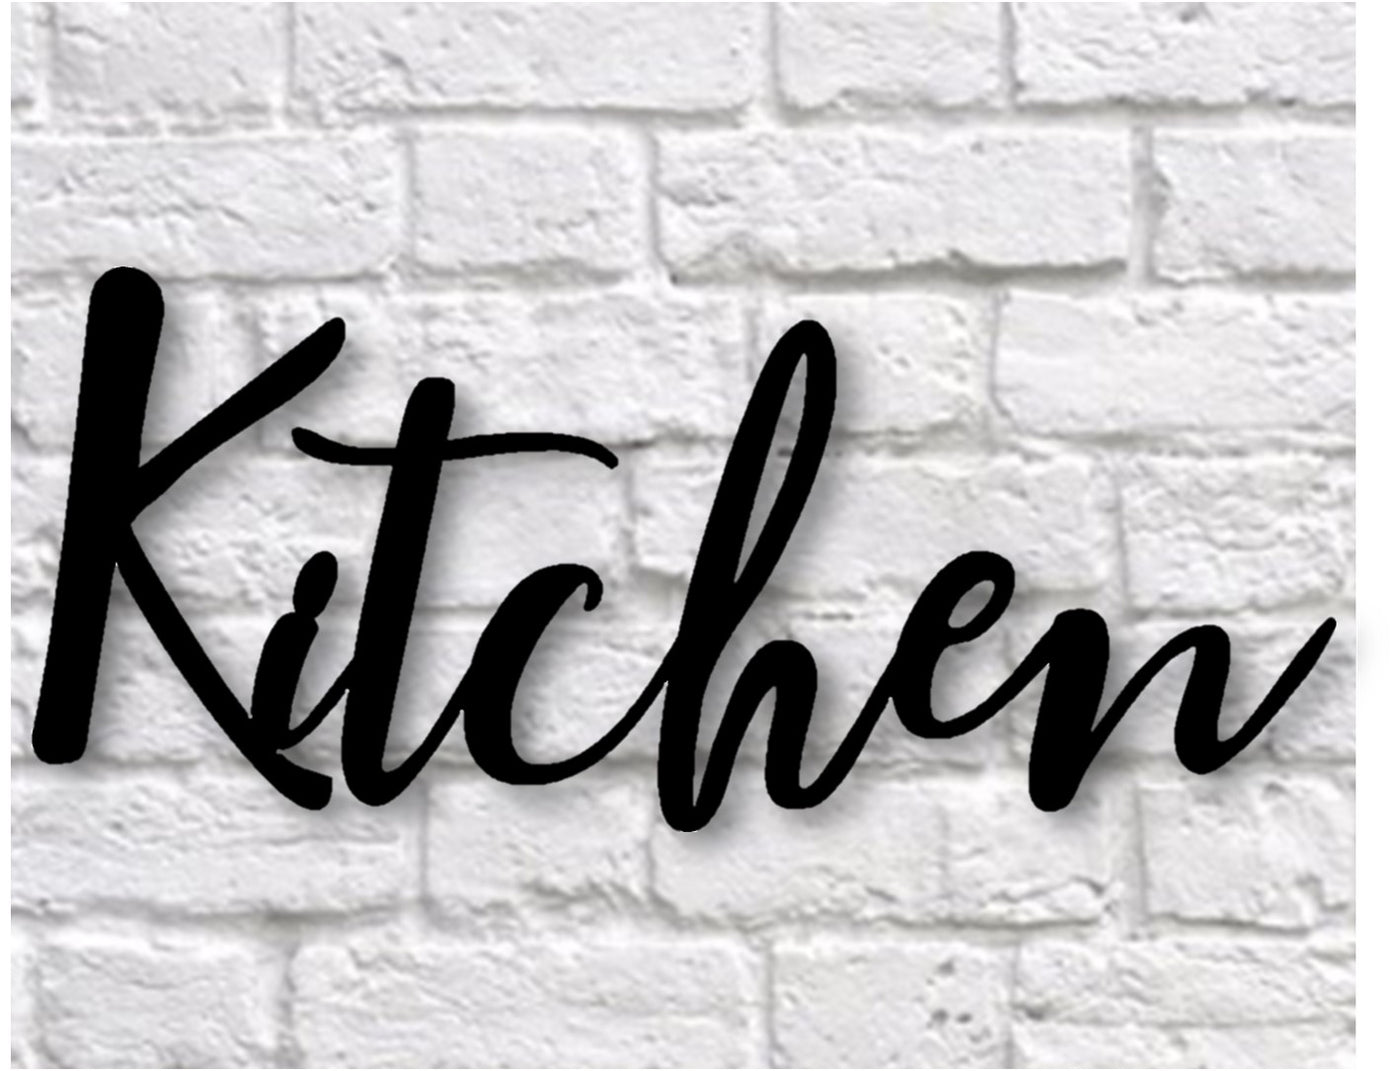 Kitchen Metal Word Sign - Madison Iron and Wood - Metal Art - metal outdoor decor - Steel deocrations - american made products - veteran owned business products - fencing decorations - fencing supplies - custom wall decorations - personalized wall signs - steel - decorative post caps - steel post caps - metal post caps - brackets - structural brackets - home improvement - easter - easter decorations - easter gift - easter yard decor